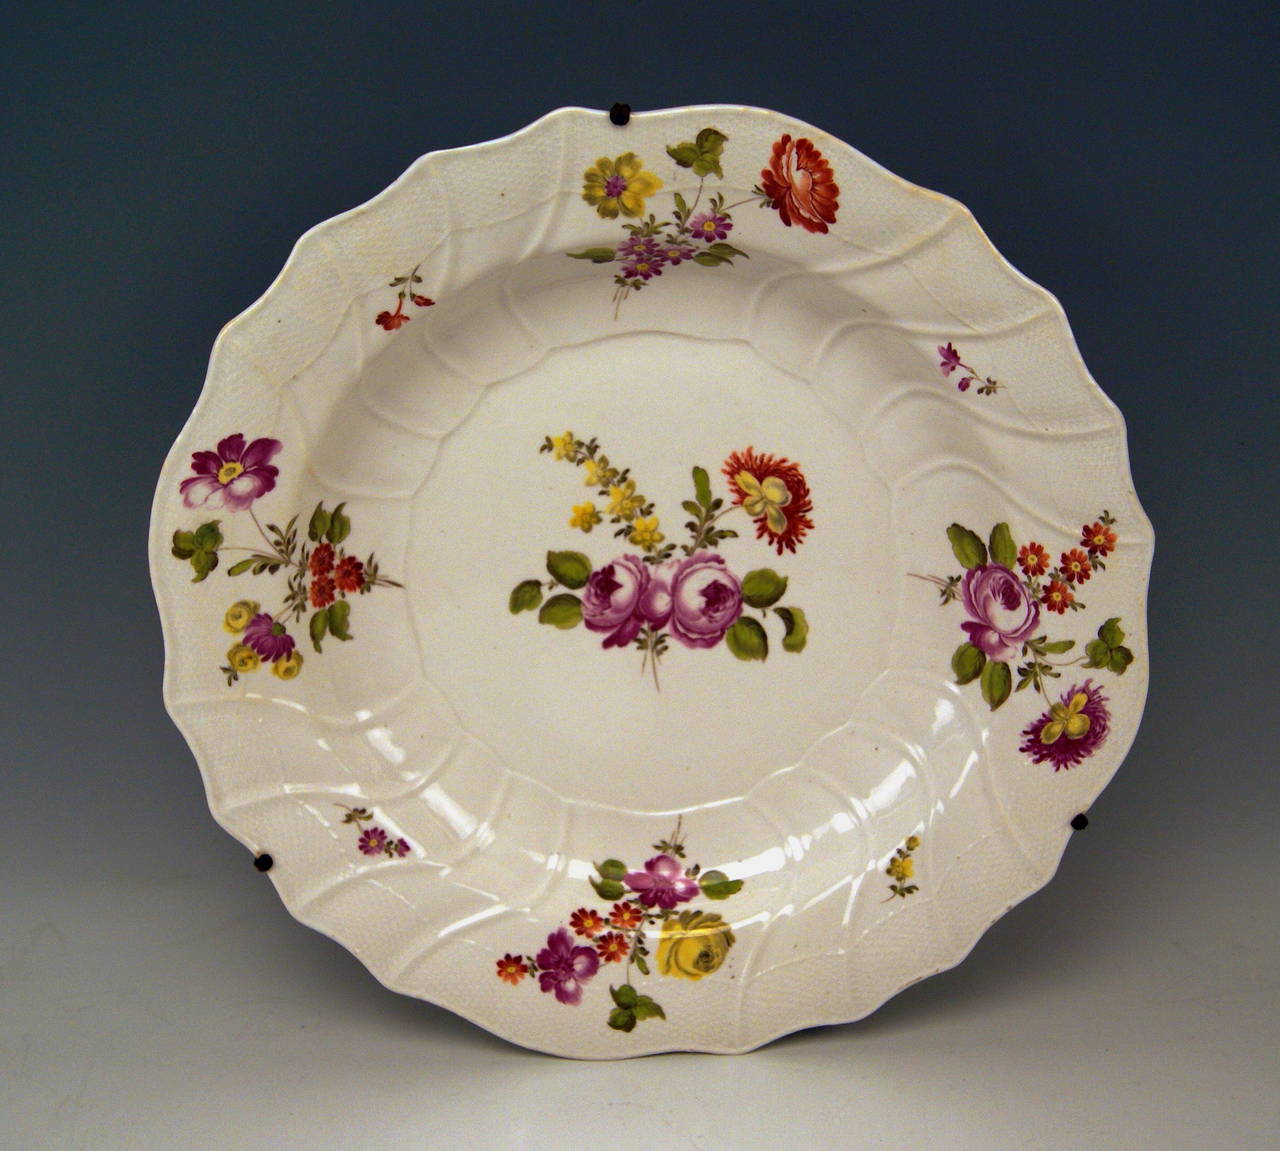 Painted Two Huge Baroque, Imperial Viennese Porcelain Manufactory Plates, circa 1750